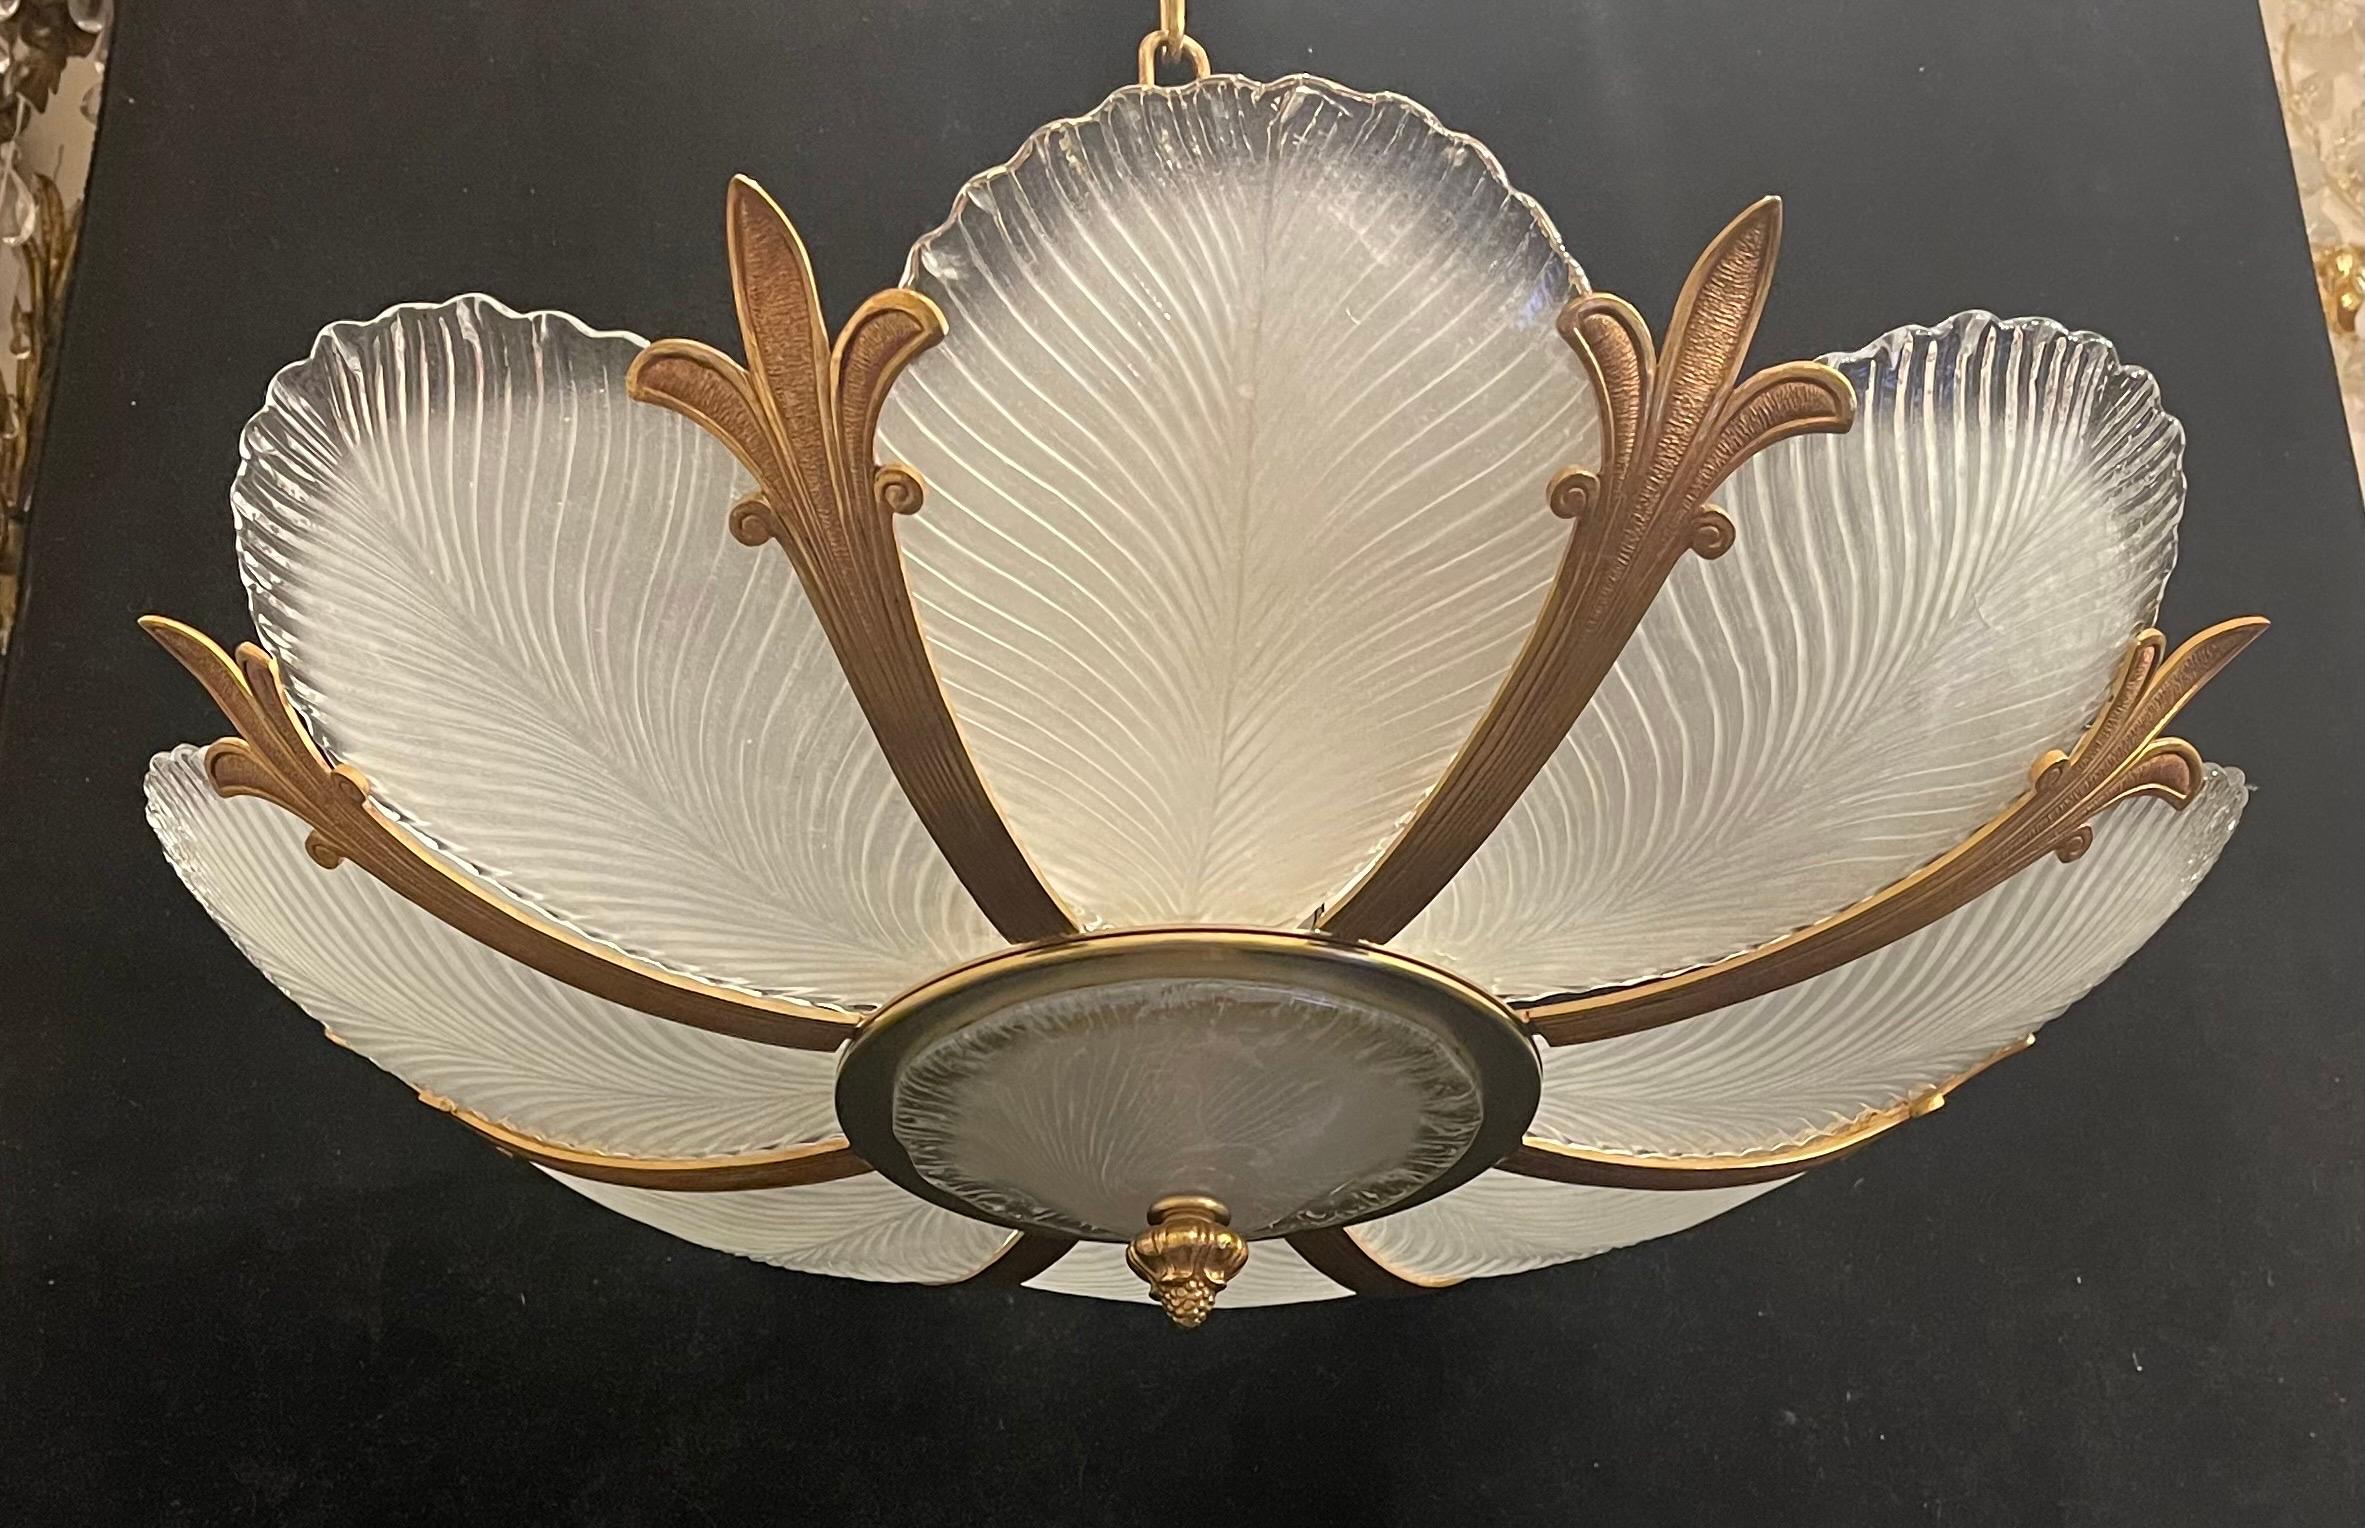 A wonderful French style bronze and art glass leaf form semi-flush mount large ceiling fixture with 8 UL candelabra sockets, this chandelier comes ready to install with all mounting hardware.